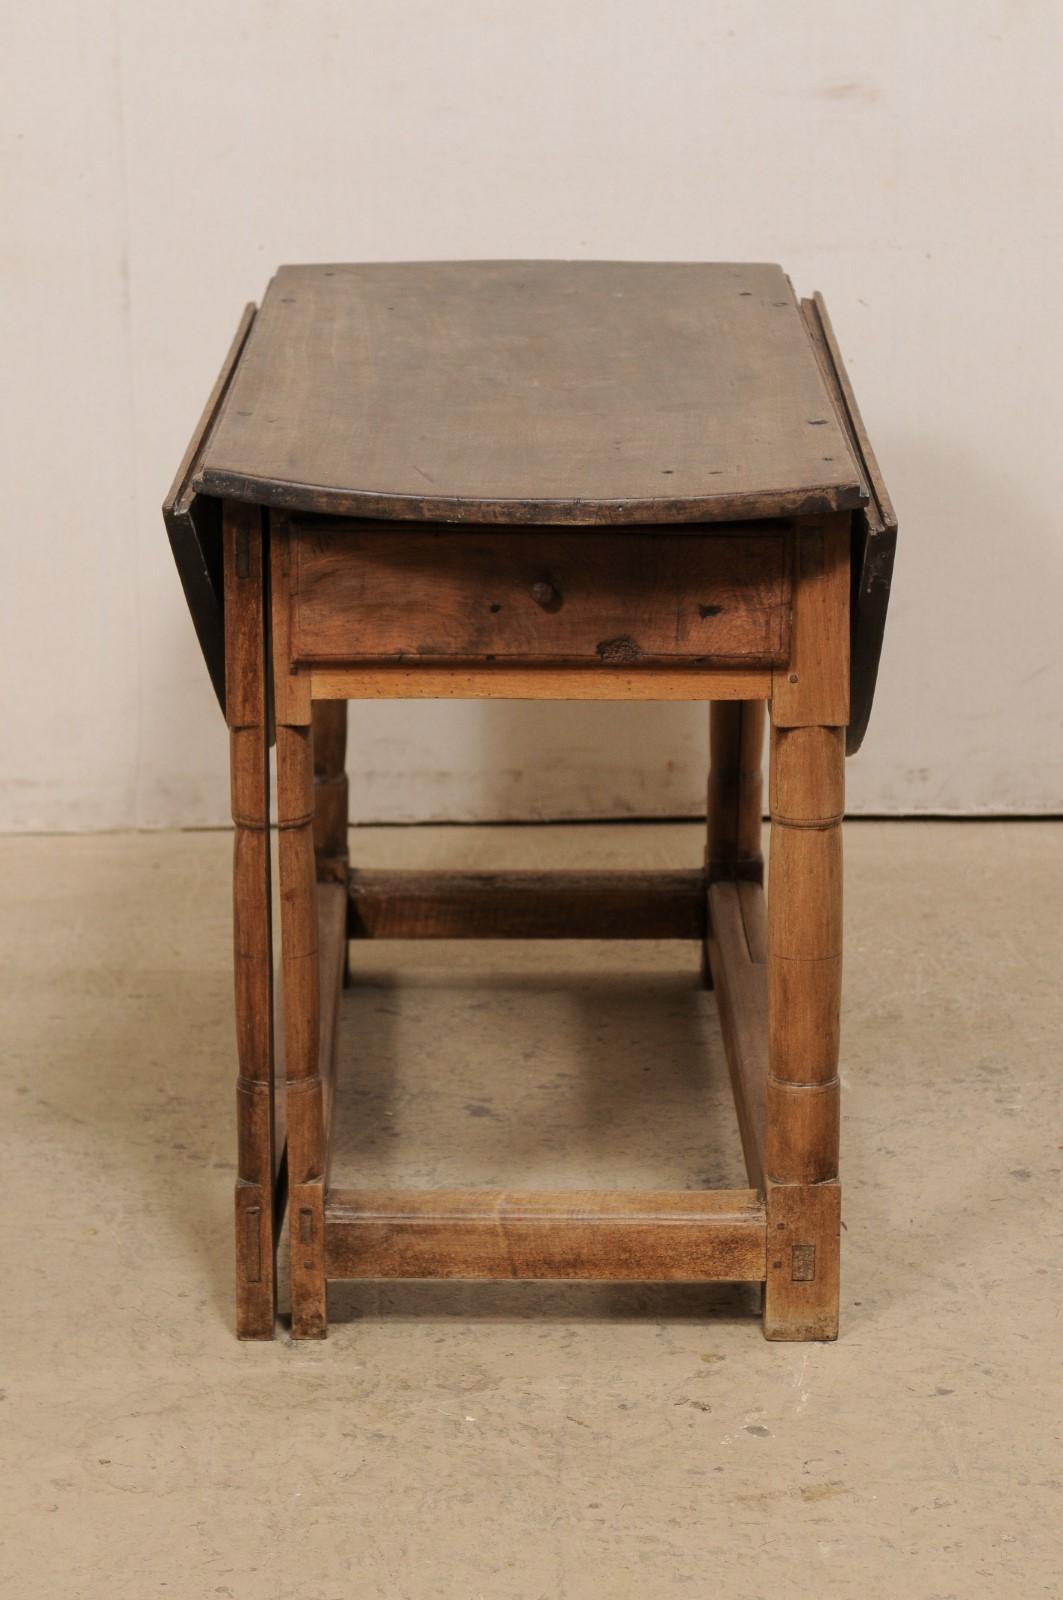 Italian Double Gate-Leg Table w/Drop Leaves on Either Side, Turn of 18th/19th C. For Sale 1